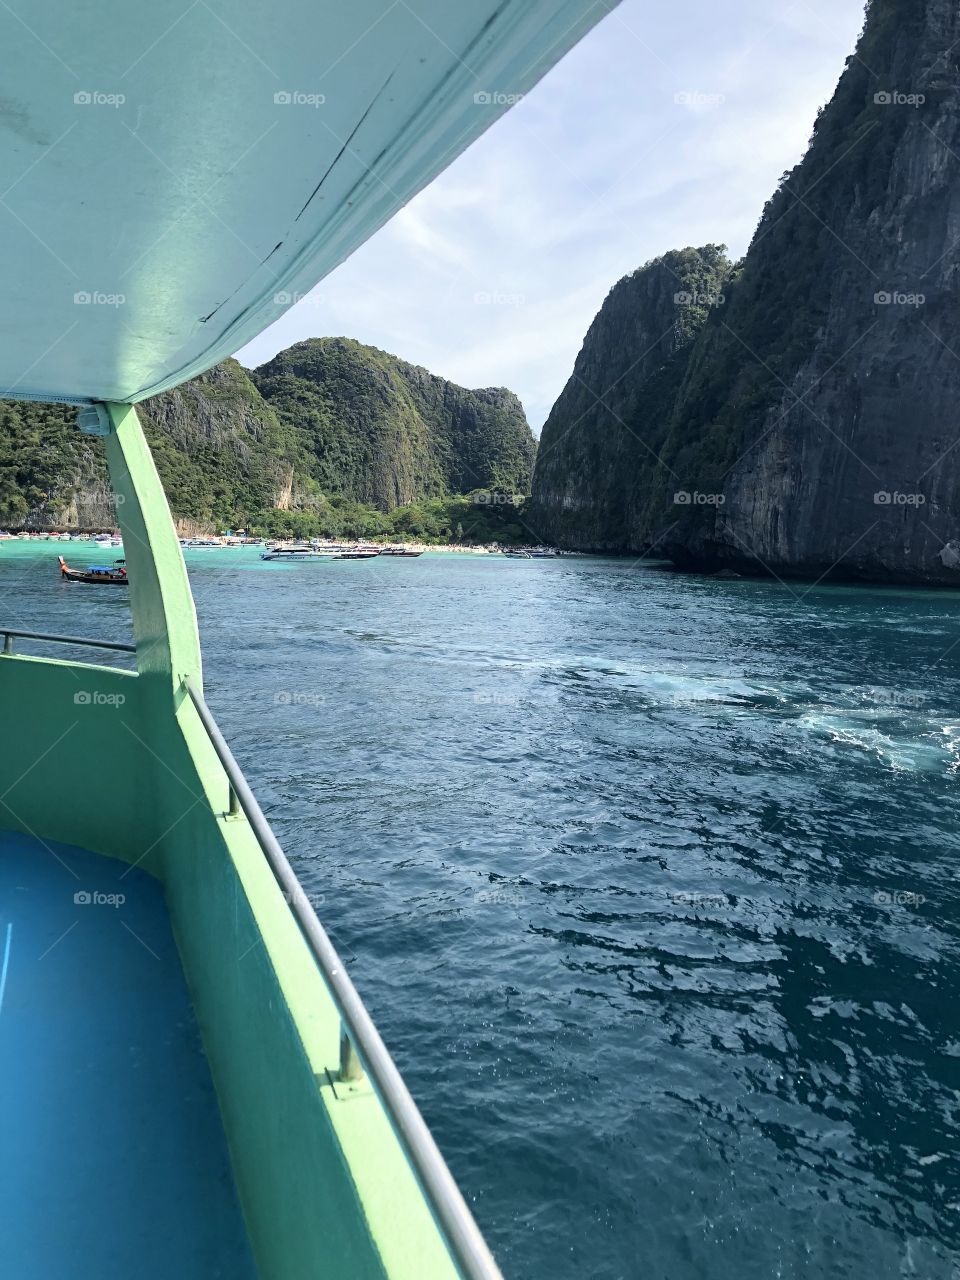 On a booze cruise on our way to Maya Beach in the Phi Phi Islands of Thailand. This is the beach where they shot the movie “The Beach” with Leo DiCaprio!